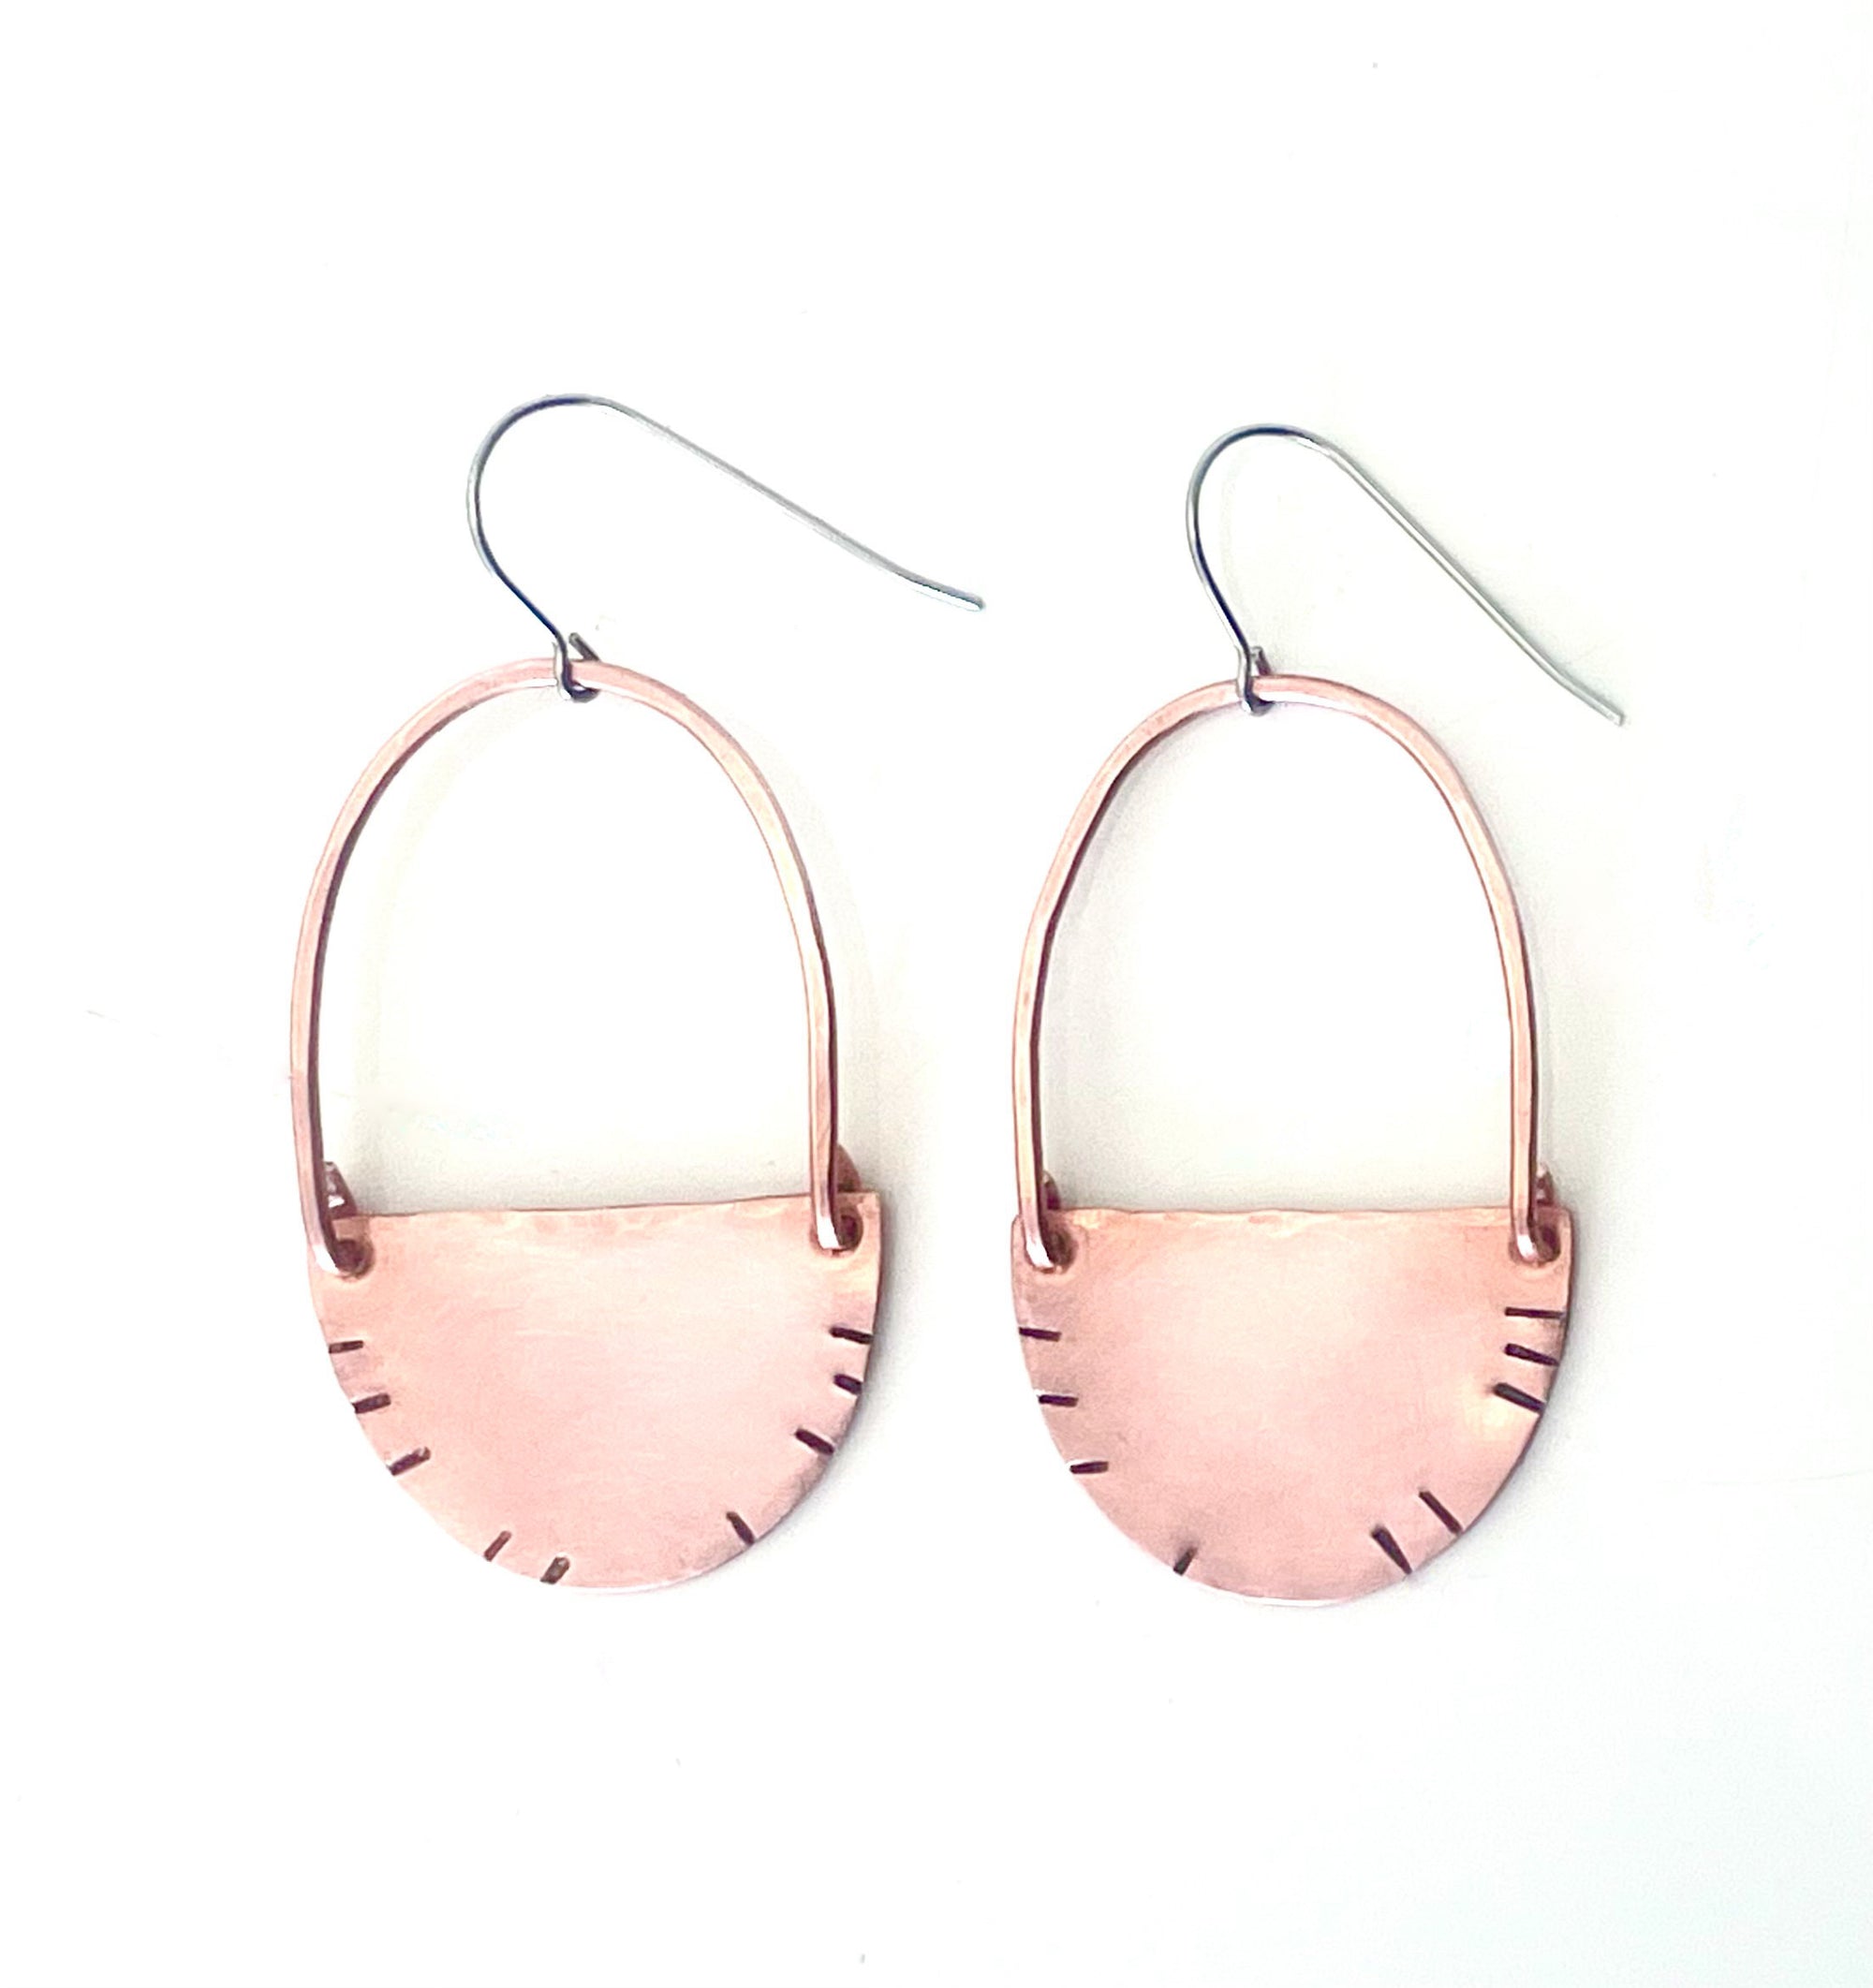 Half Moon and Wire with Lines Earrings